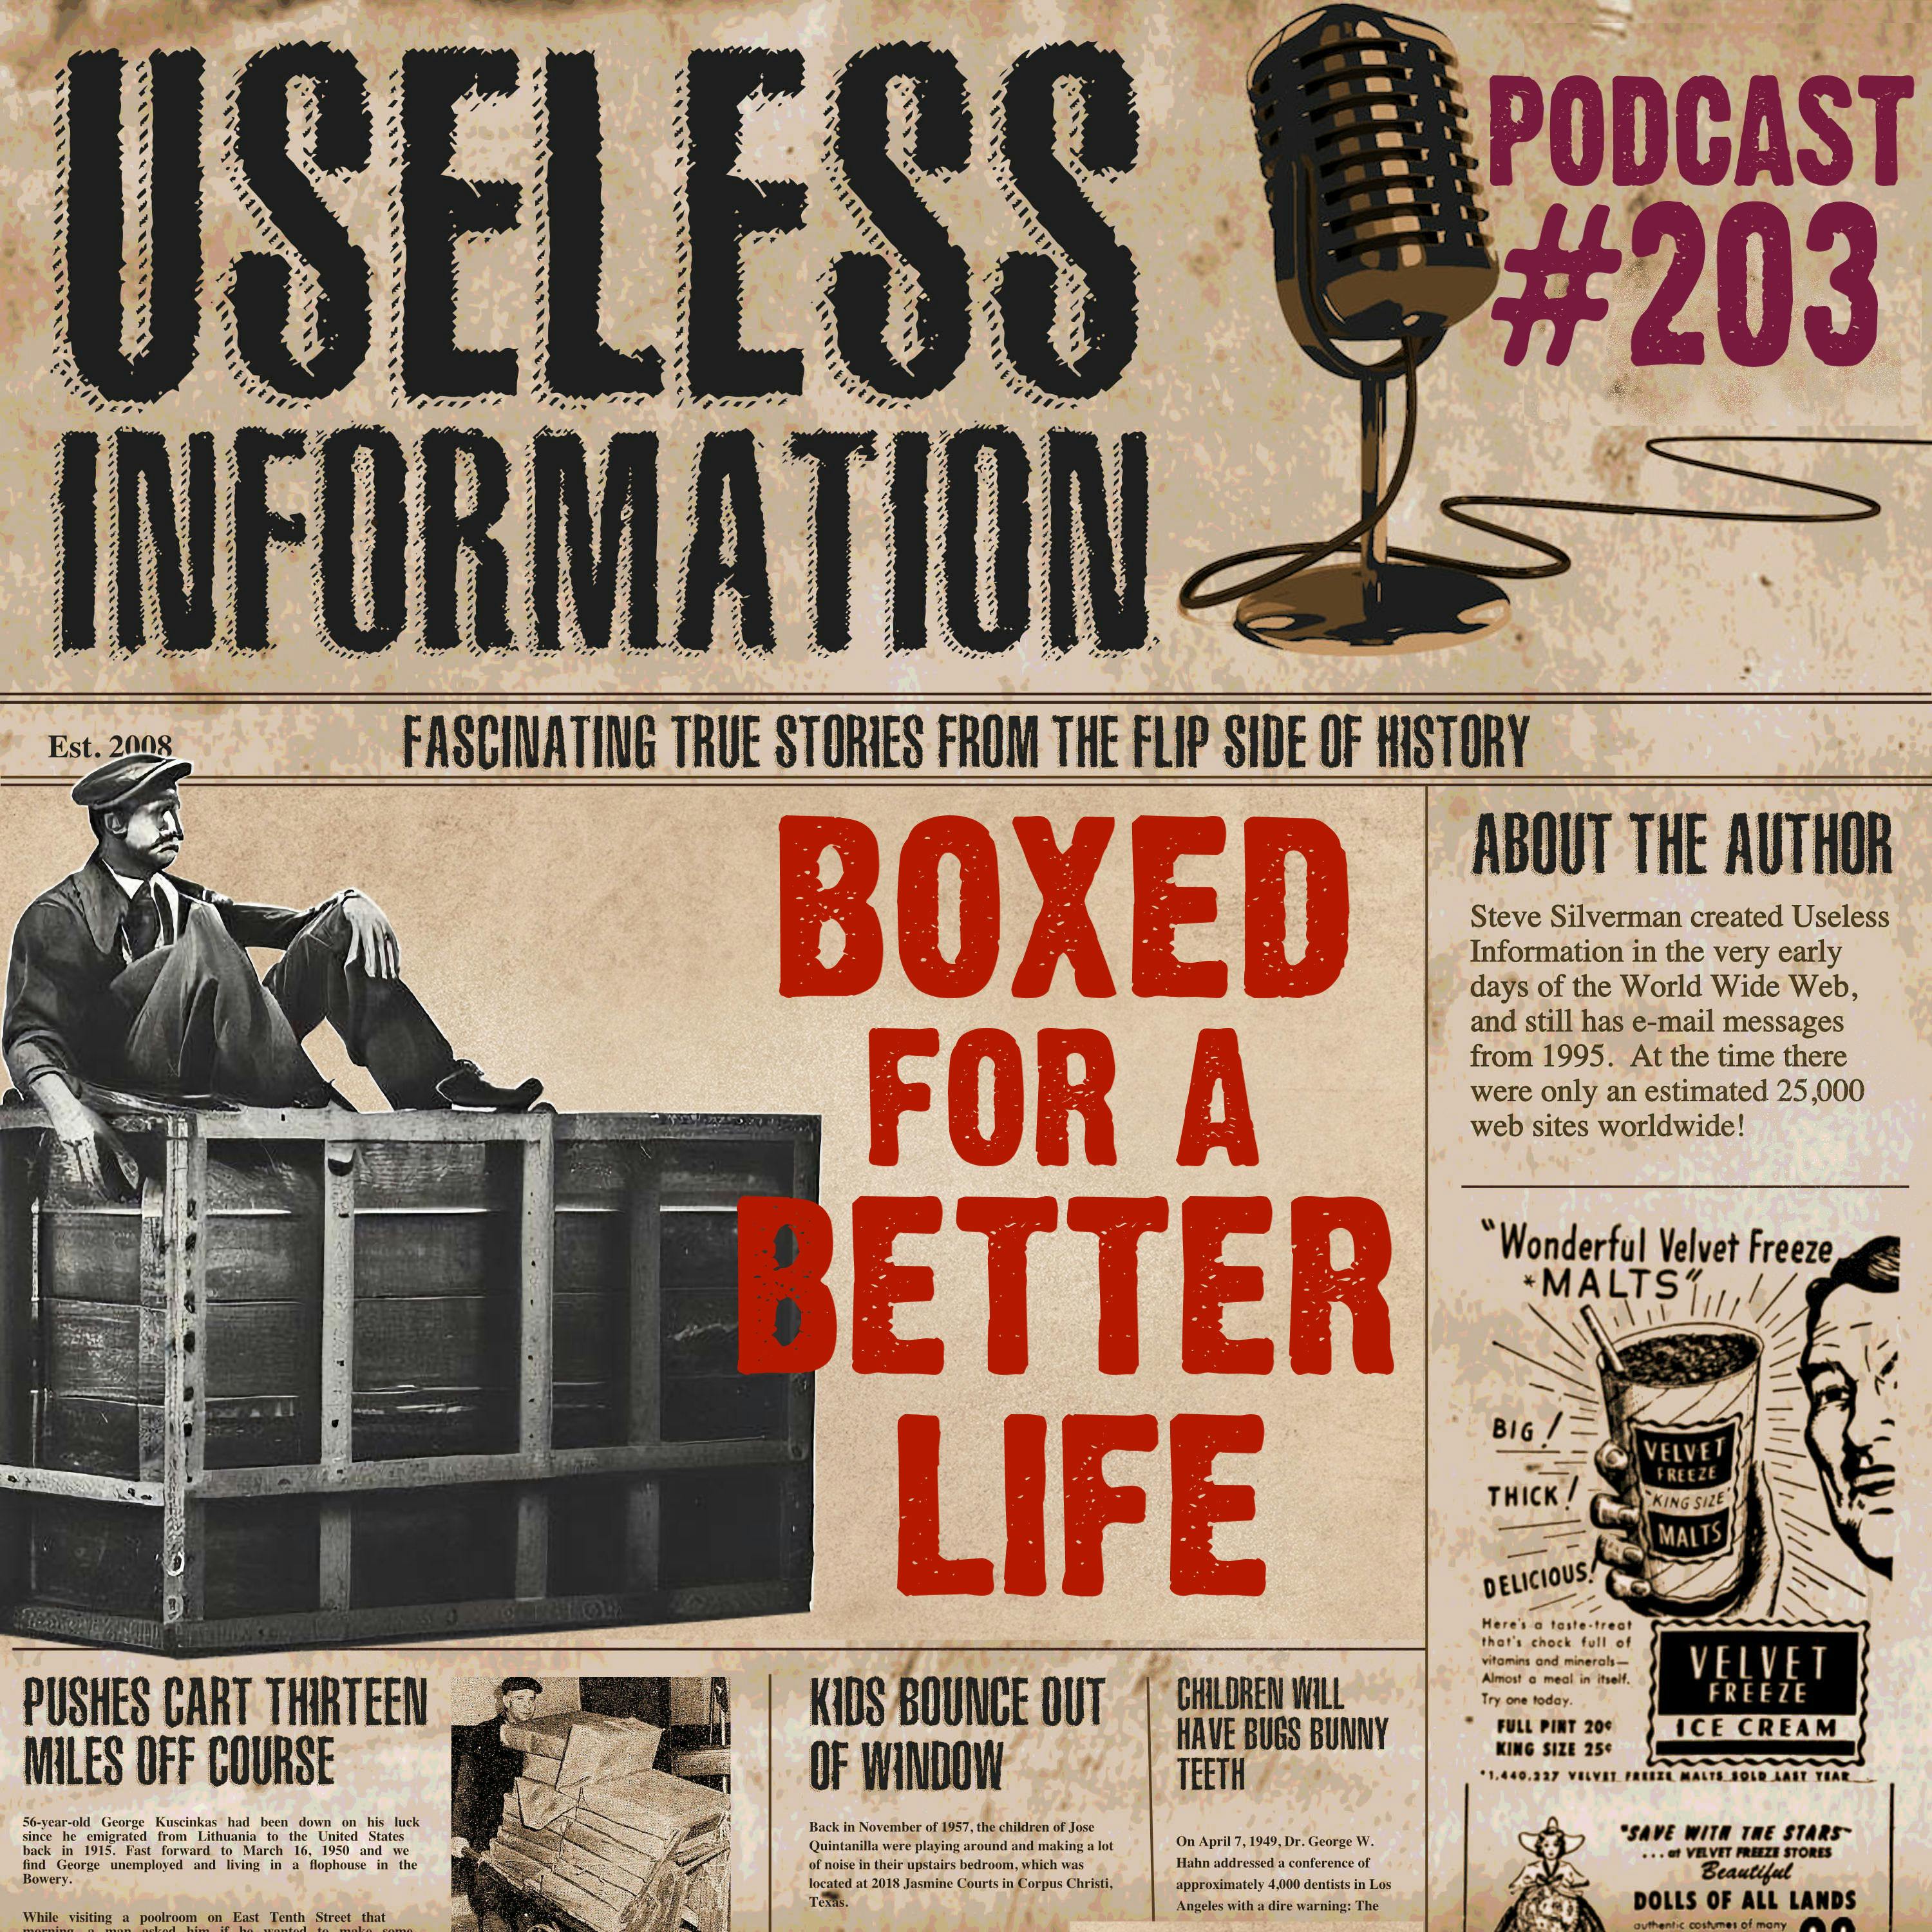 Boxed for a Better Life - UI Podcast #203